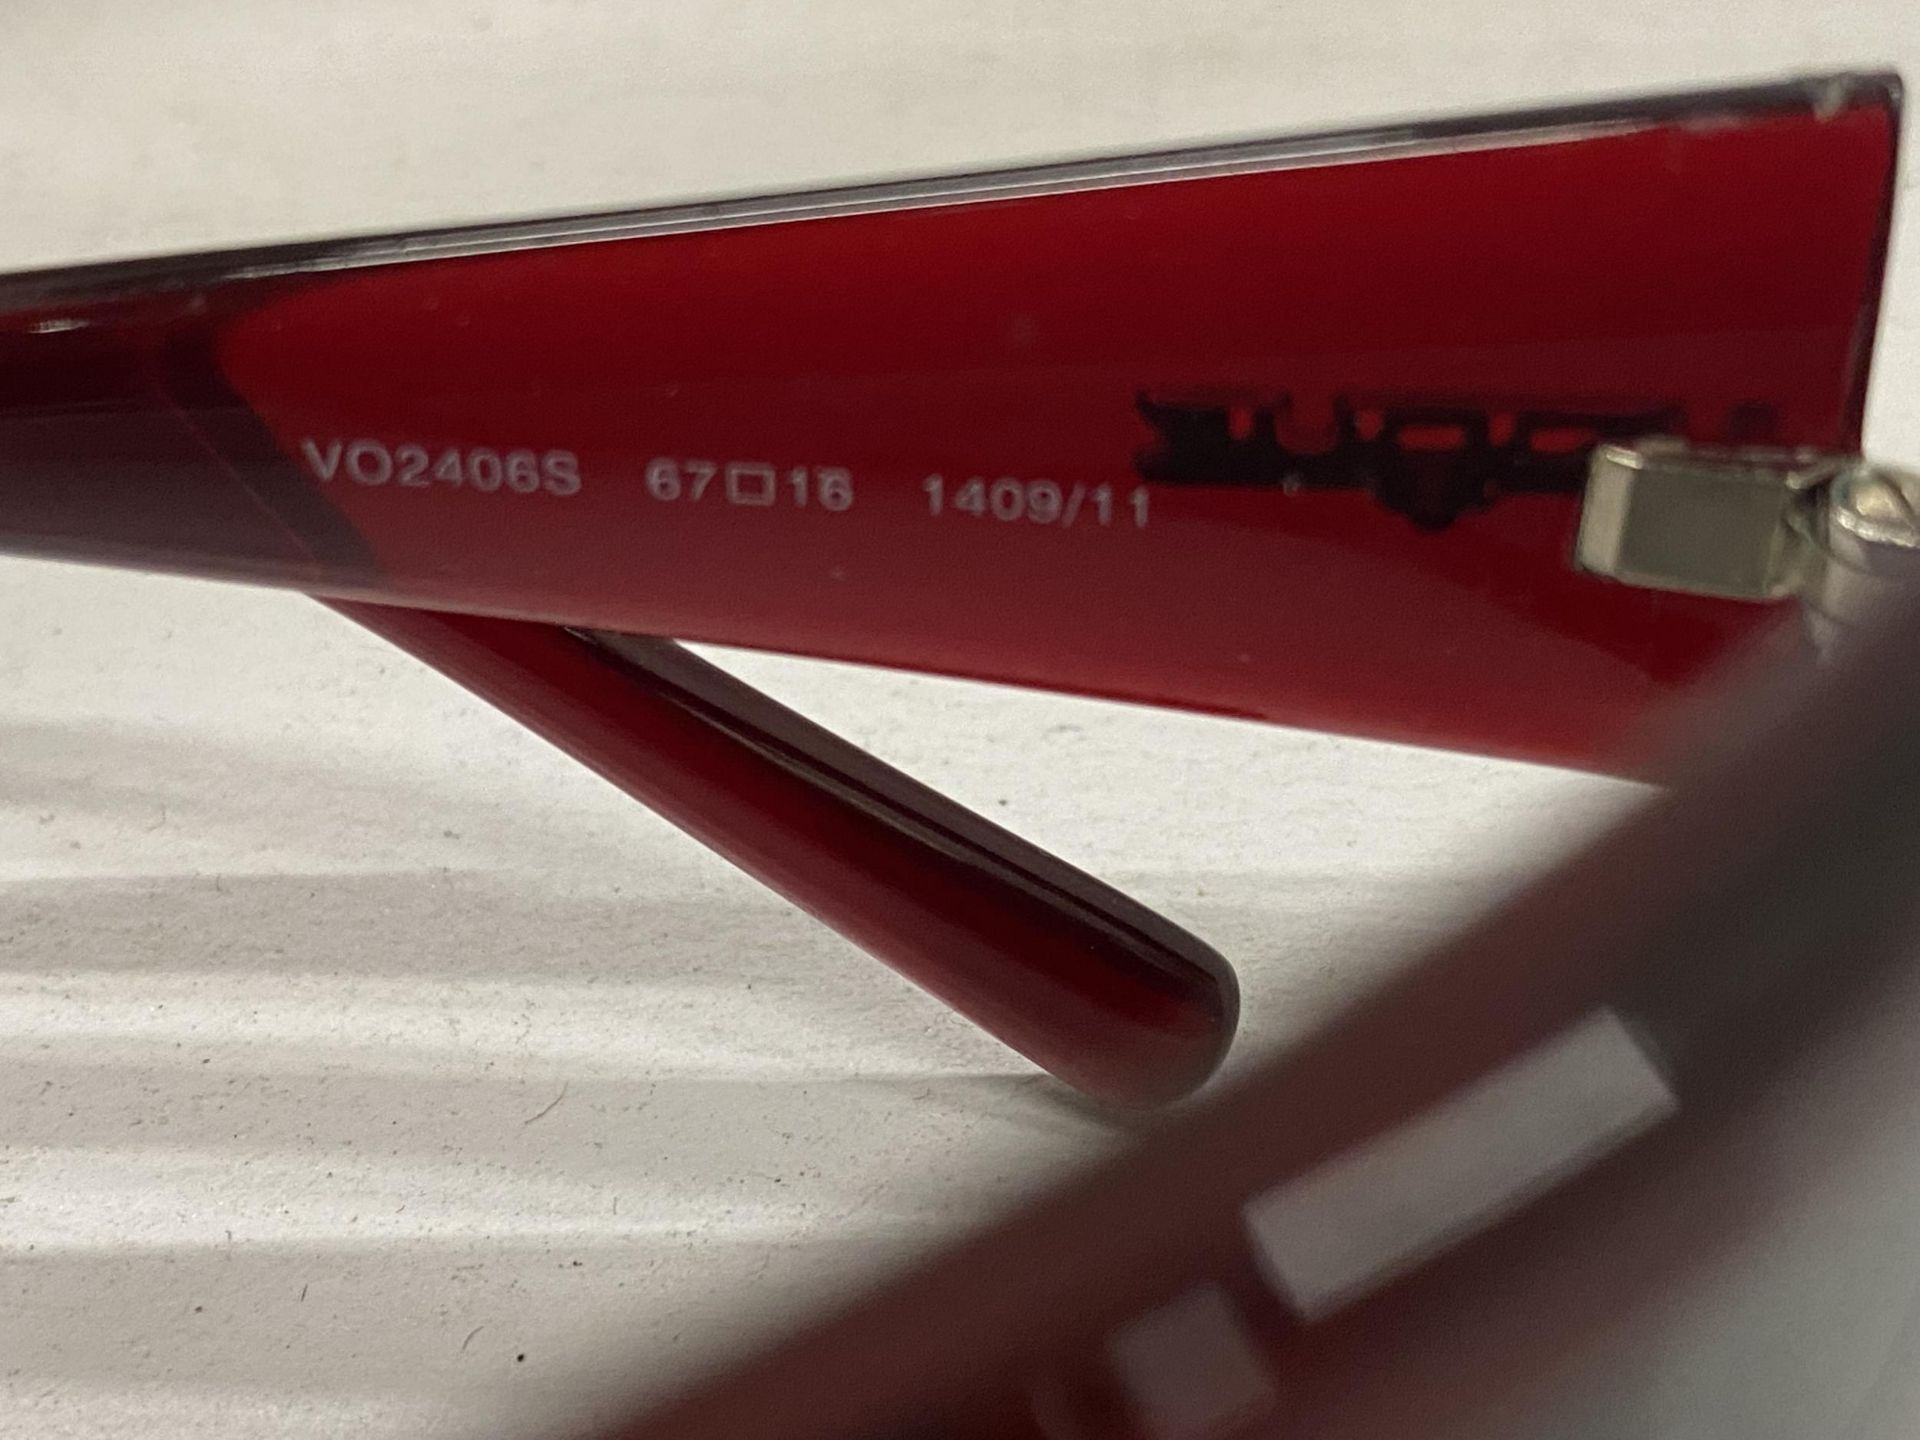 A PAIR OF VOGUE SUNGLASSES WITH CASE - Image 4 of 4